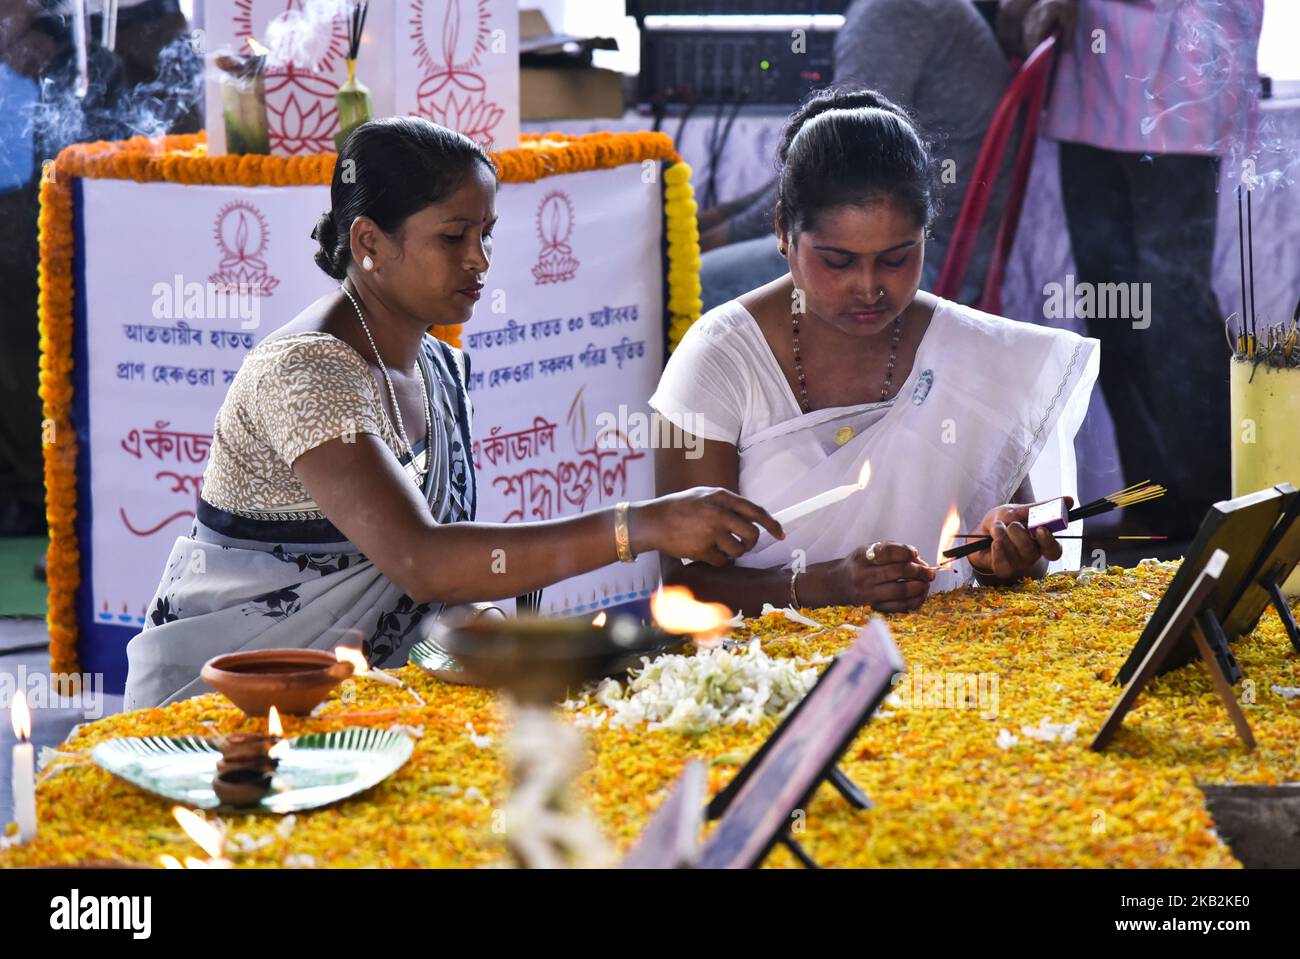 Family members pay tribute to the victims of October 30, 2008, serial bomb blasts on its 10th anniversary at the place of blast in Ganeshguri of Guwahati, Assam, India on Tuesday, October 30, 2018. The 2008 Assam bombings occurred on 30 October 2008. The blasts ripped apart Guwahati, Barpeta Road, Bongaigaon and Kokrajhar. The explosions in Guwahati ripped through Pan Bazar, Fancy Bazar and Ganeshguri, which were crowded with shoppers and office goers. In Guwahati, 41 people were killed; in Kokrajhar, 21; and in Barpeta Road, 15. (Photo by David Talukdar/NurPhoto) Stock Photo